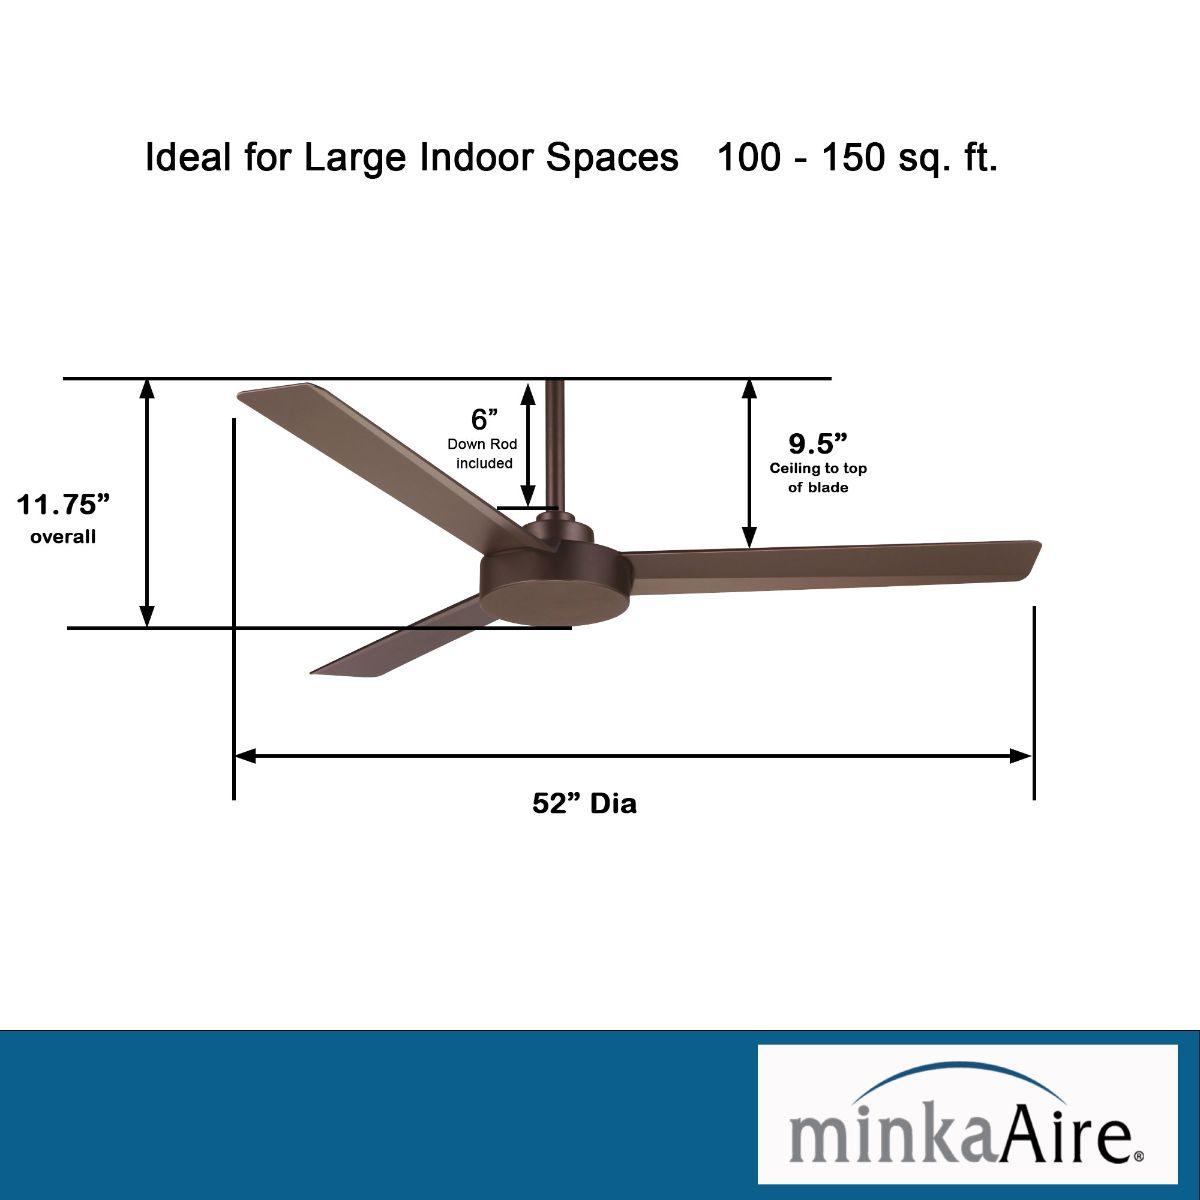 Roto 52 Inch Ceiling Fan With Wall Control